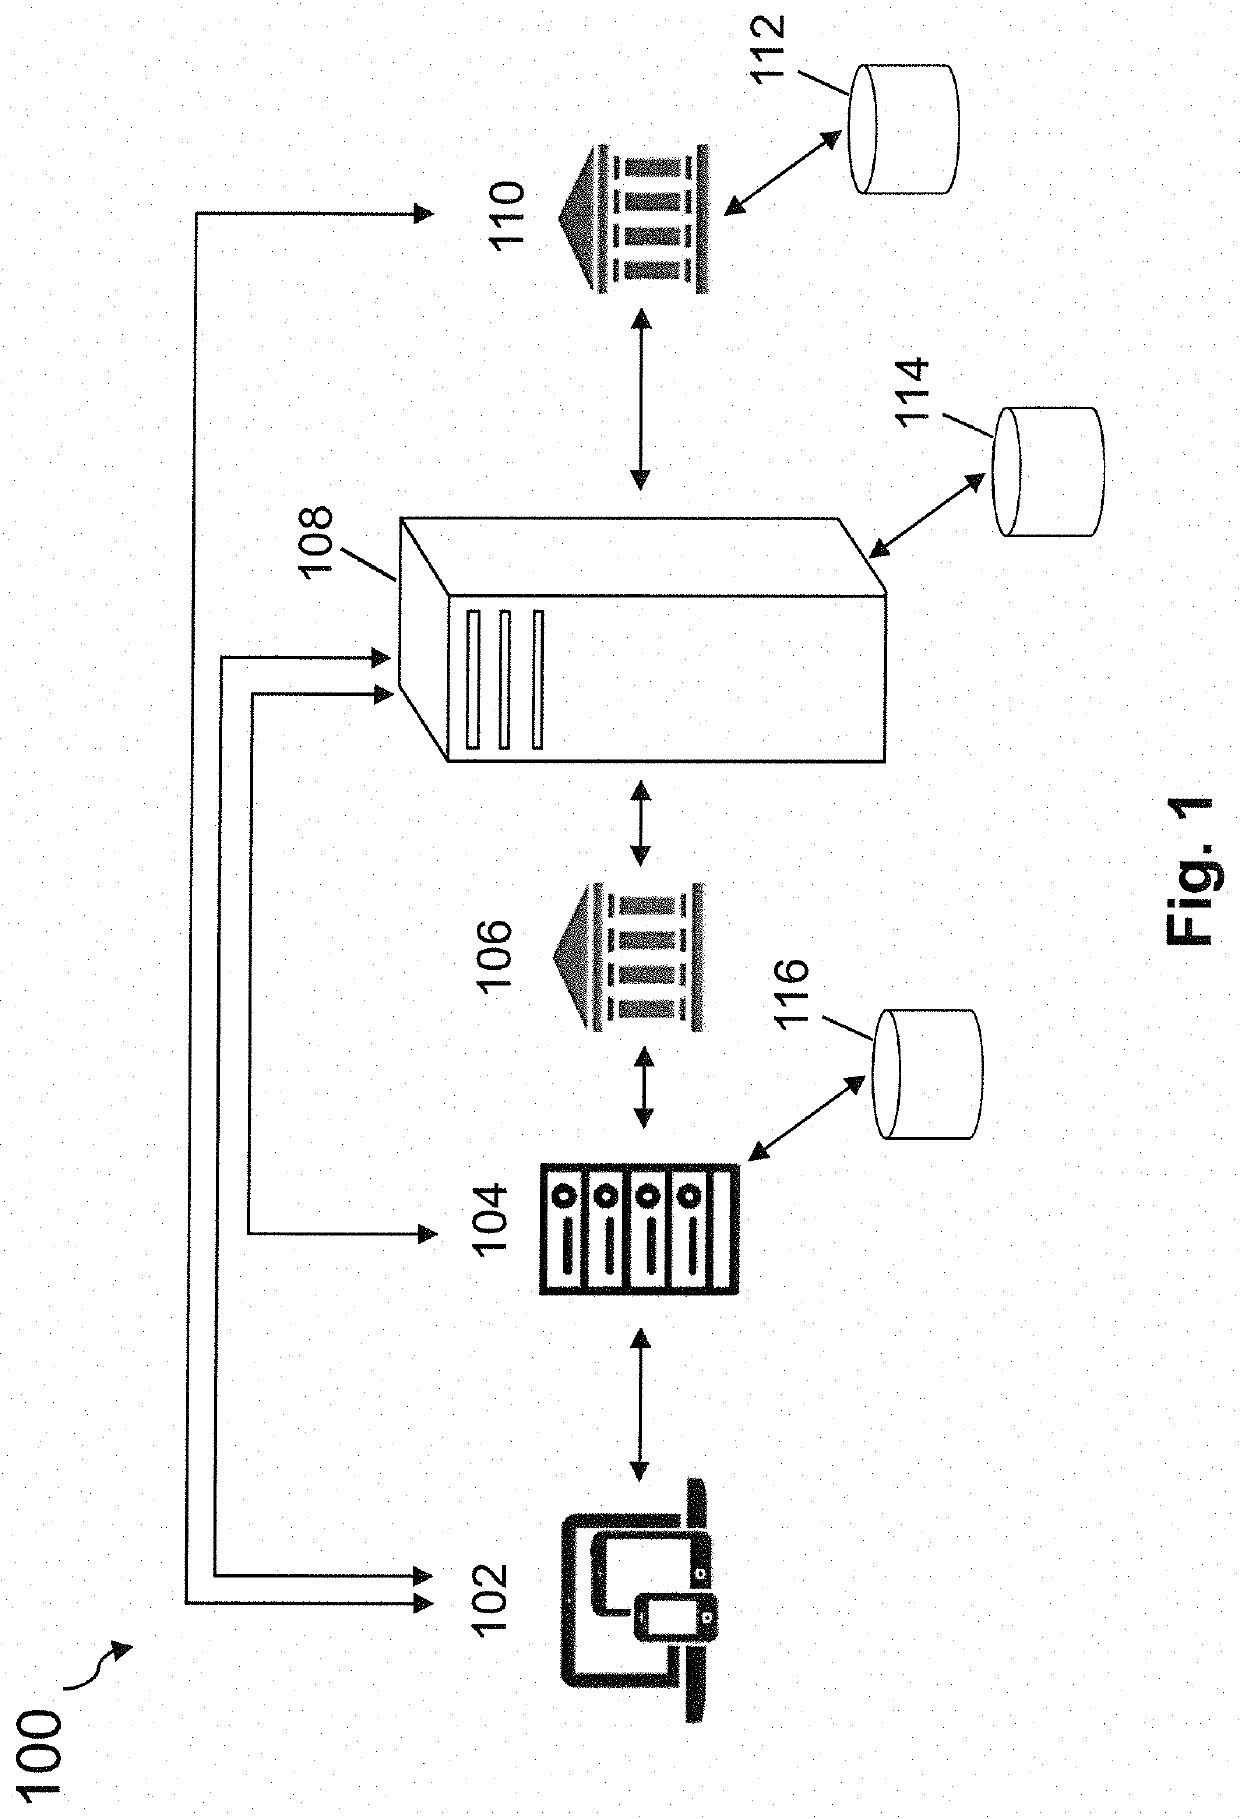 Computer system and computer-implemented method for processing an electronic commerce payment transaction